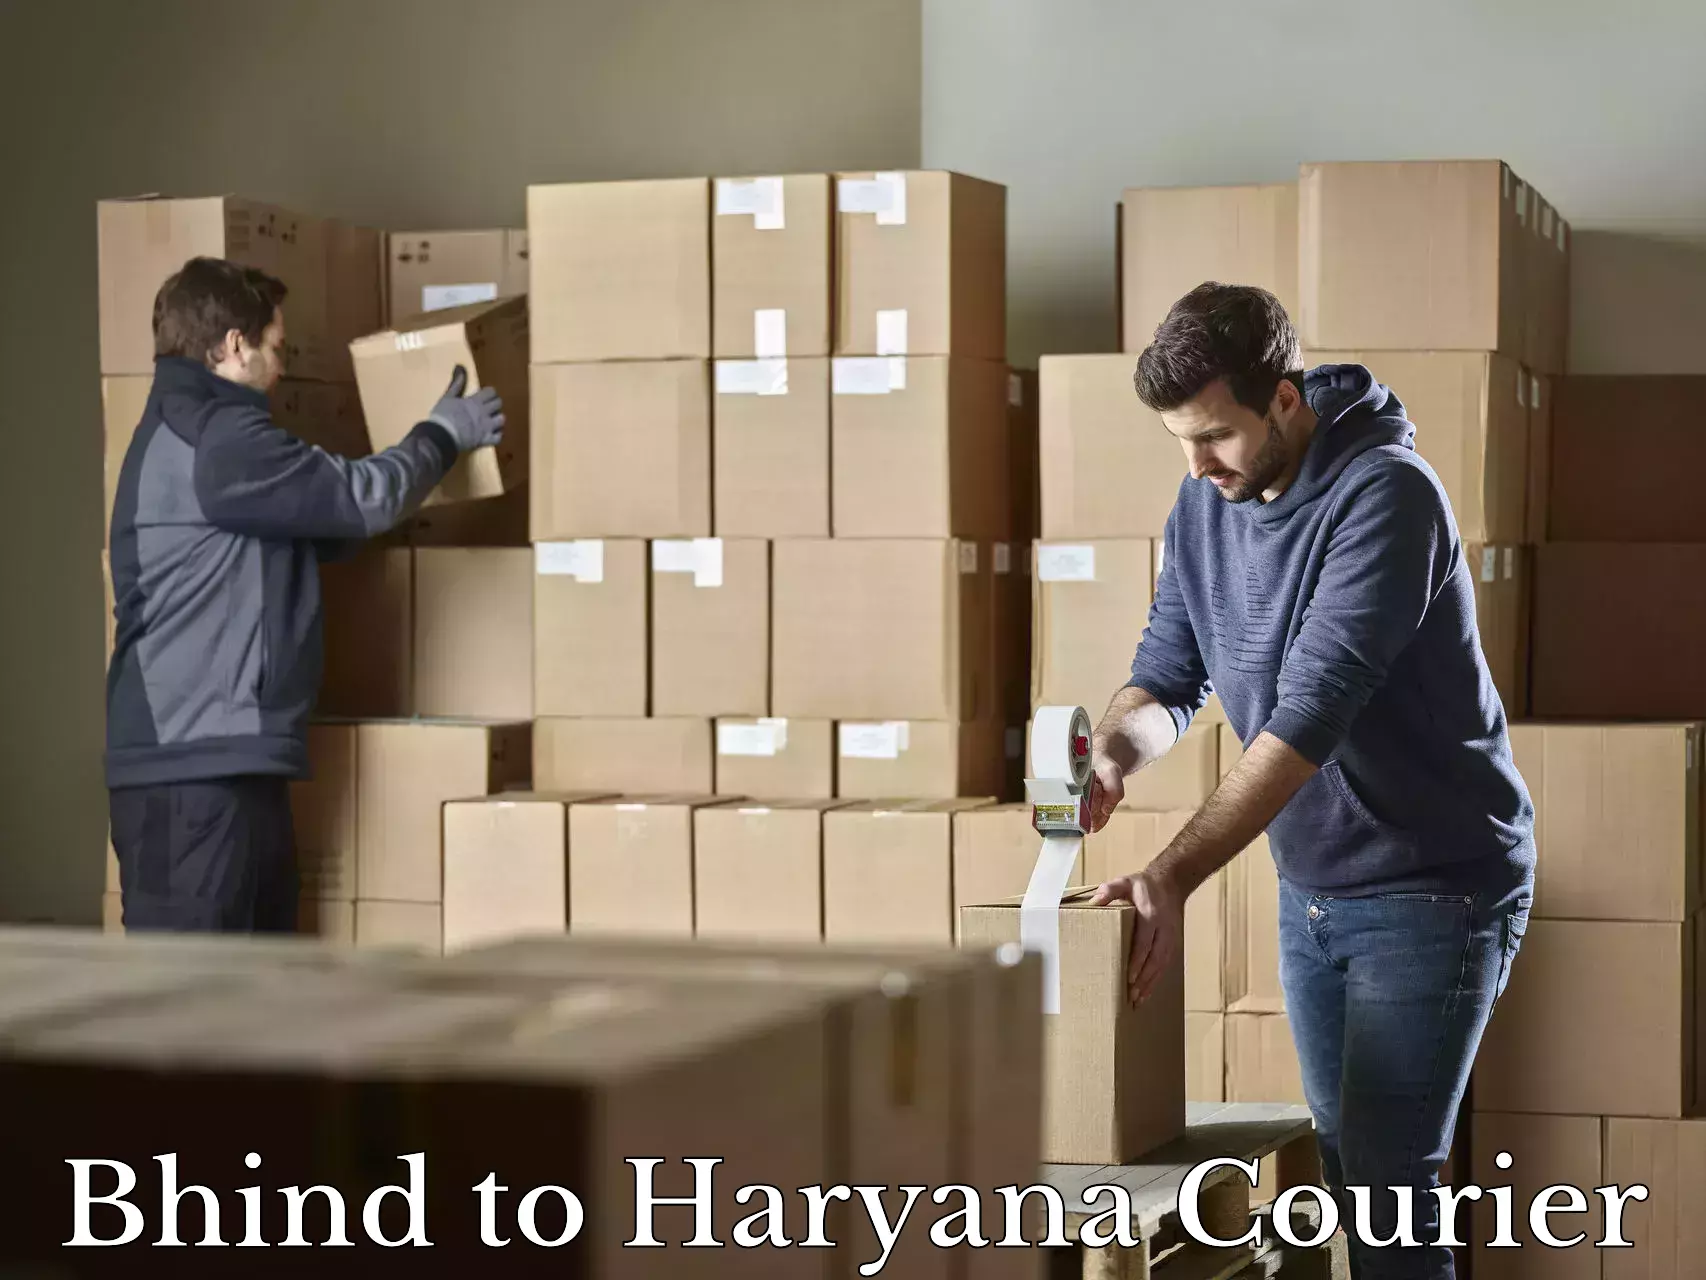 Luggage shipment specialists Bhind to Haryana